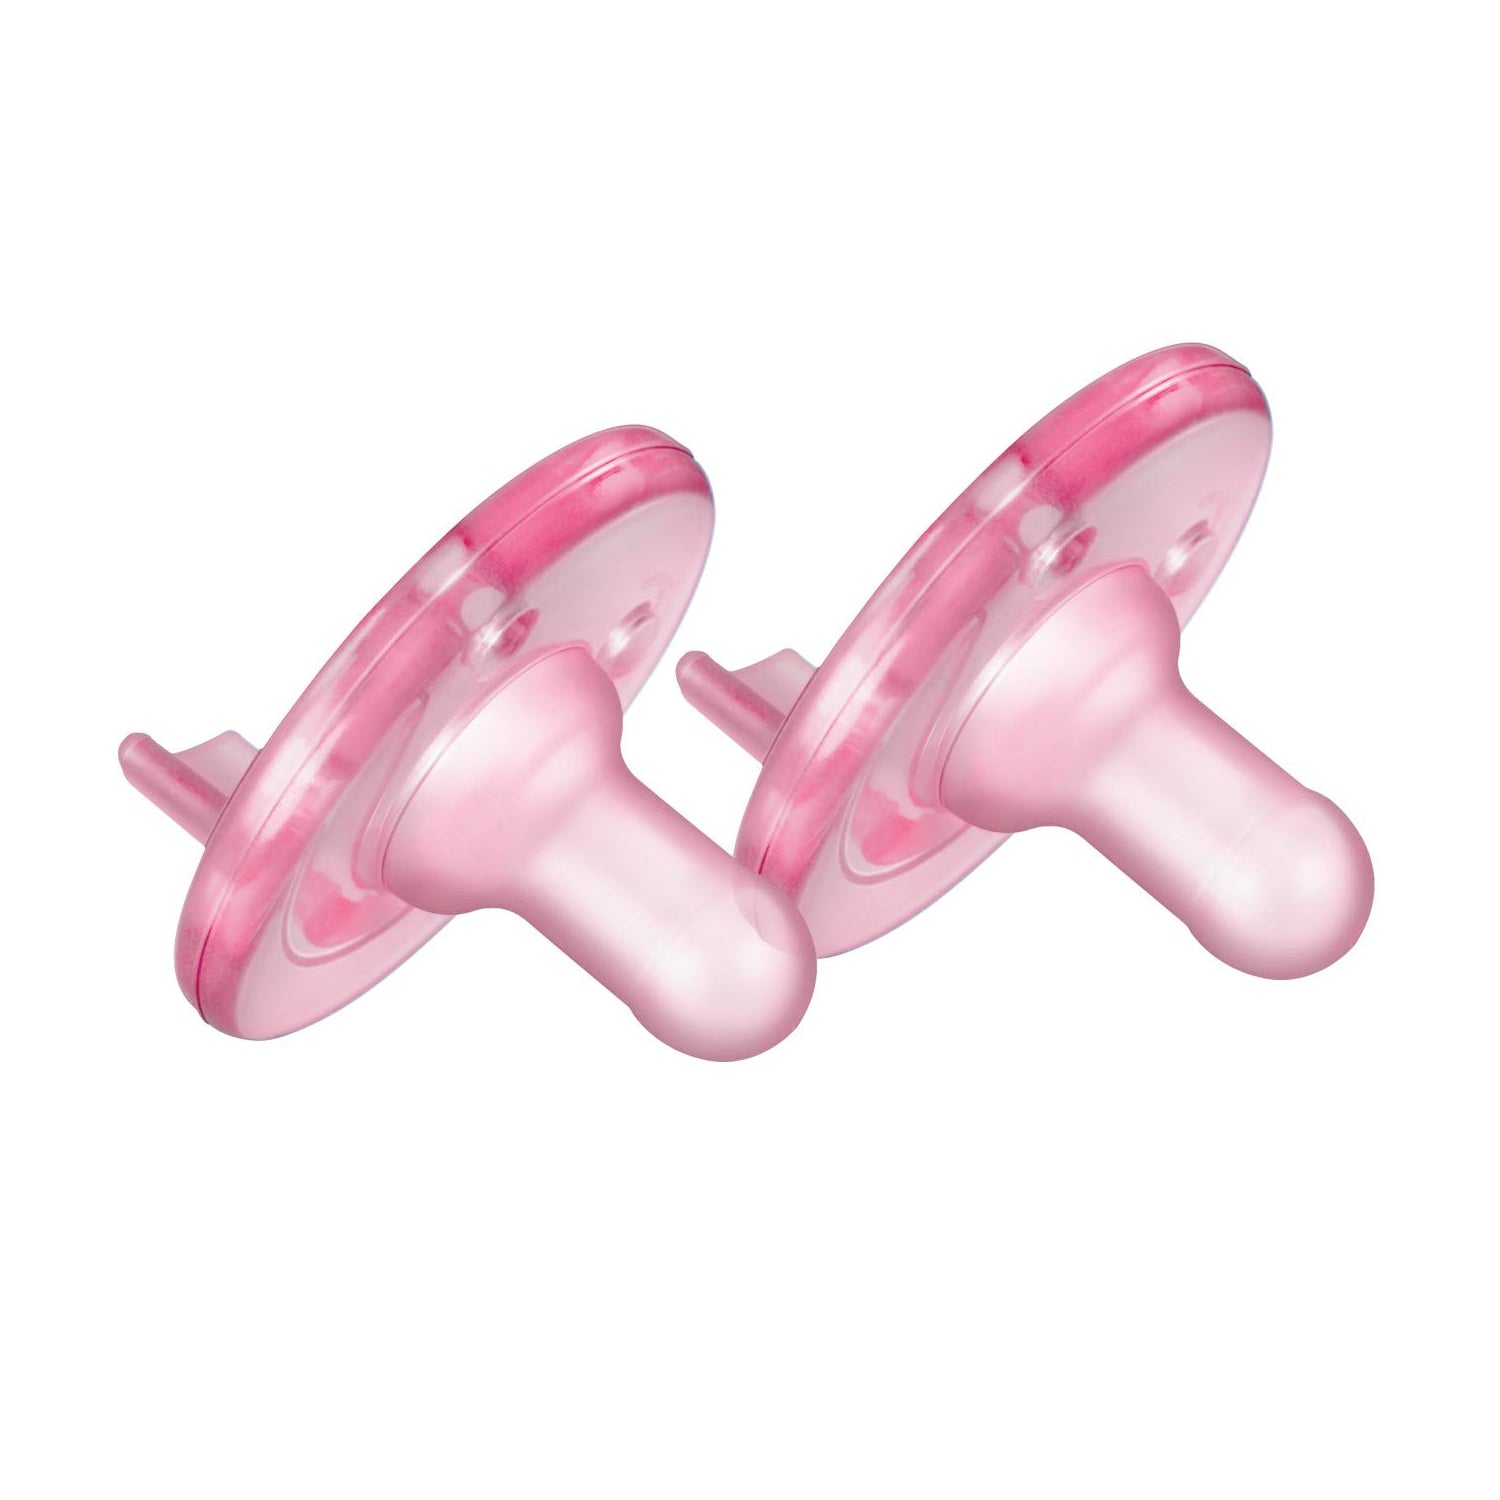 Philips Avent Pink Soothie Pacifier, 3M +, 2 Pack